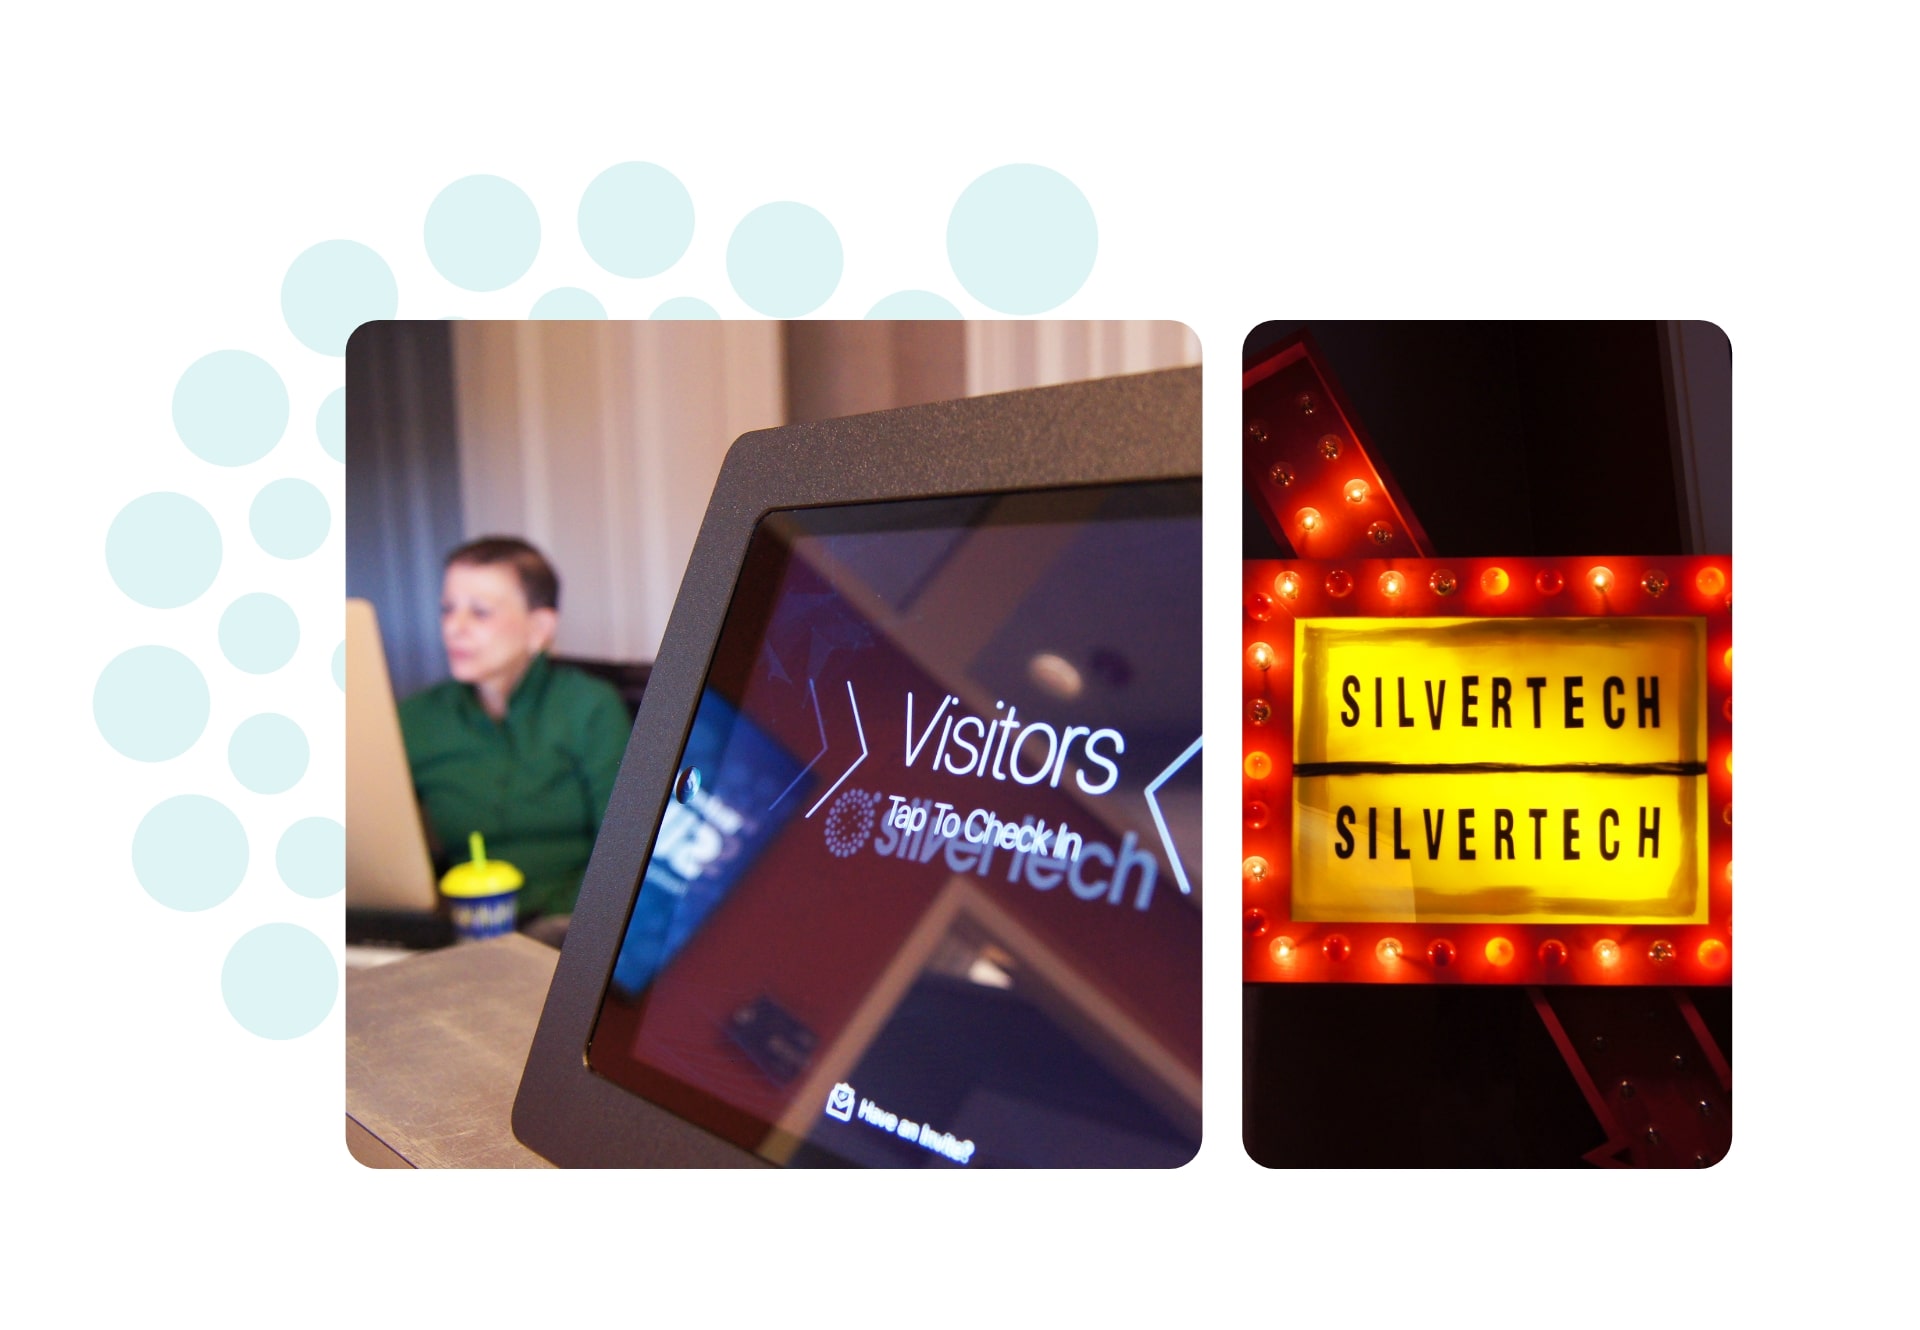 First image of Nanci at her desk with the Visitor ipad in view, second image of our SilverTech sign